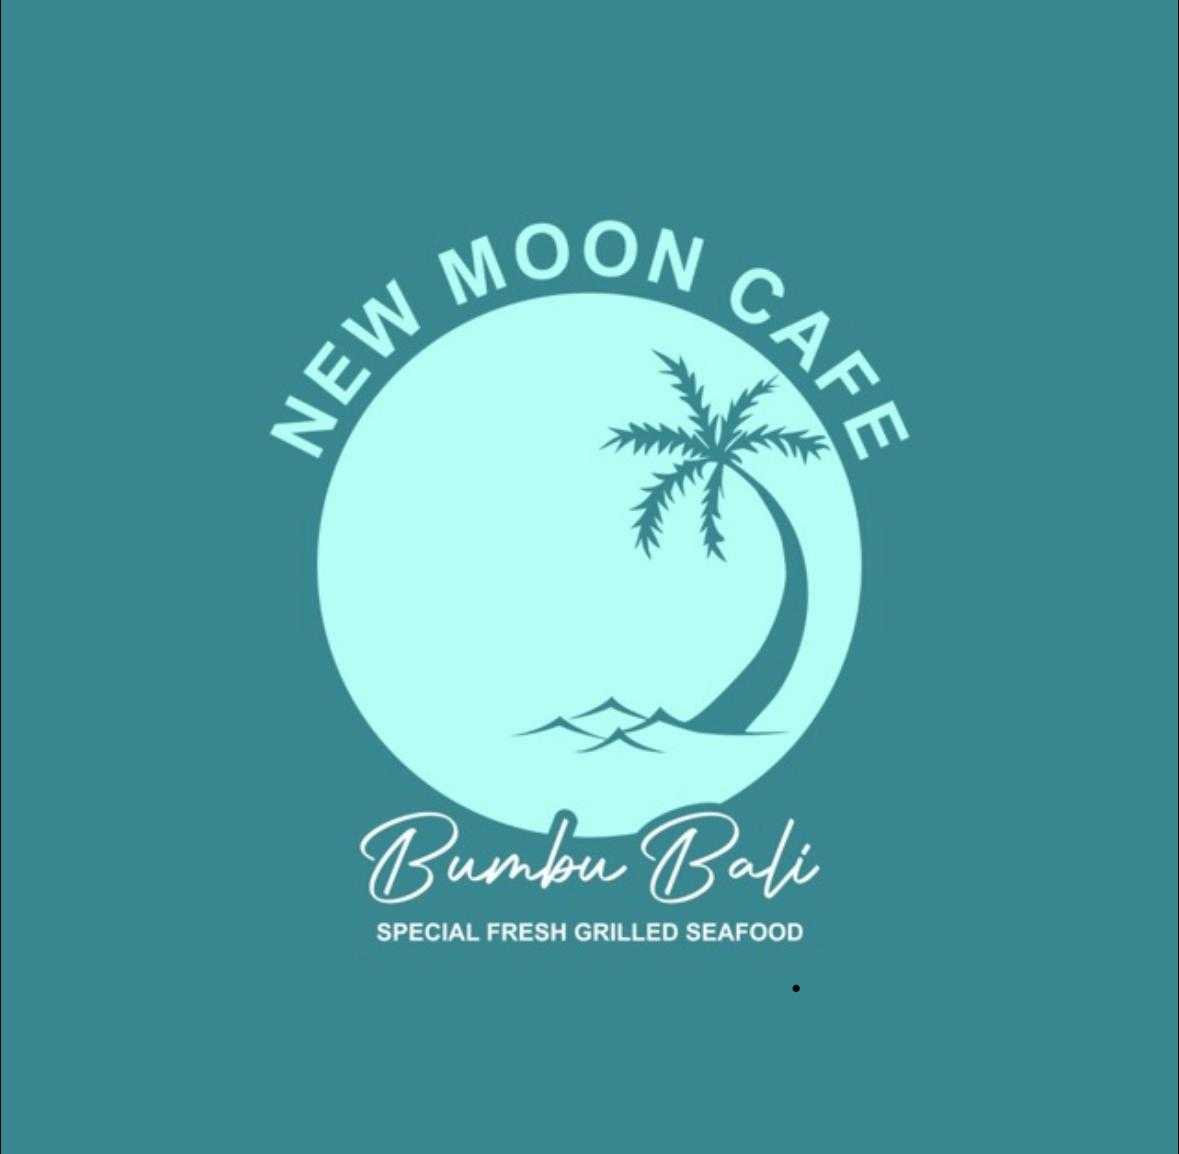 New Moon Cafe Seafood